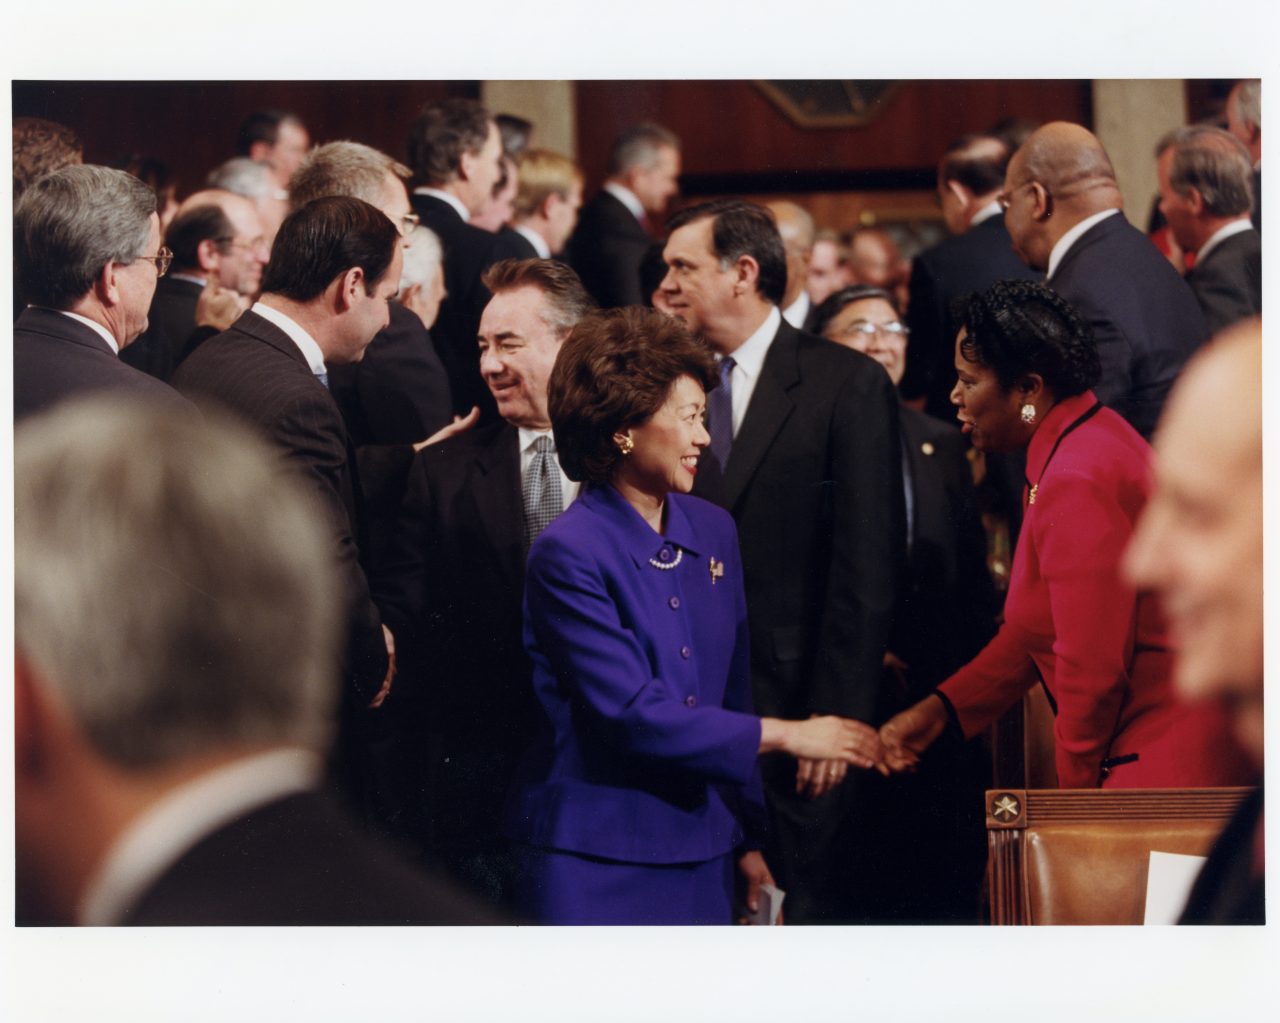 Secretary of Labor Elaine Chao entering House Chambers with the cabinet for the State of the Union Address.